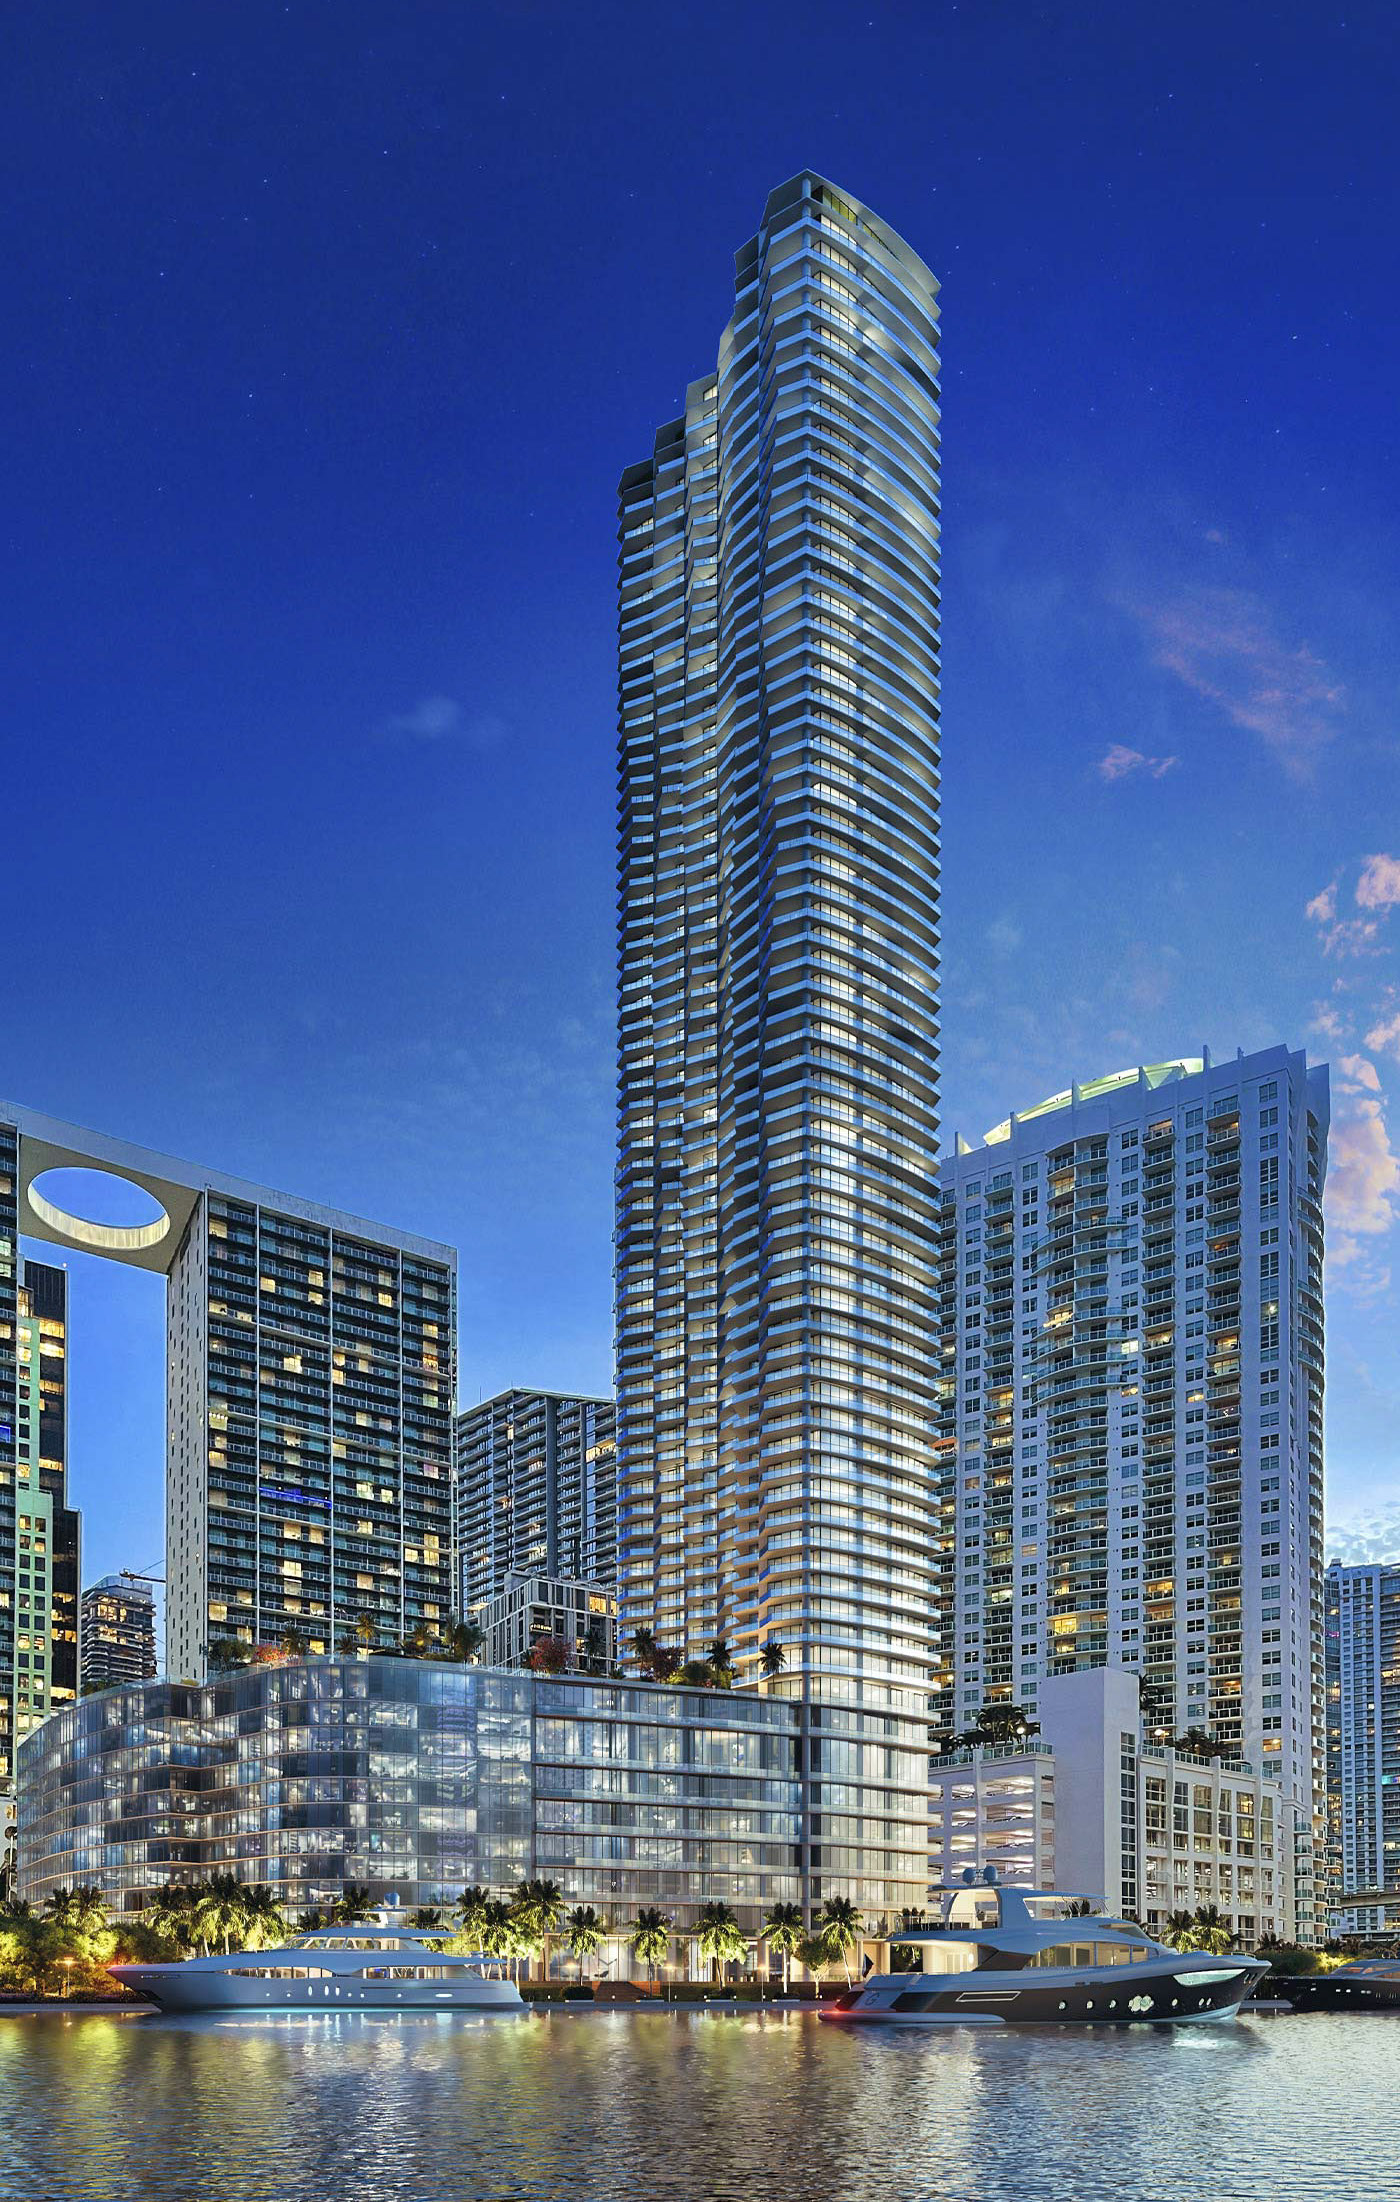 Tower Building - Baccarat Residences - Brickell, Miami